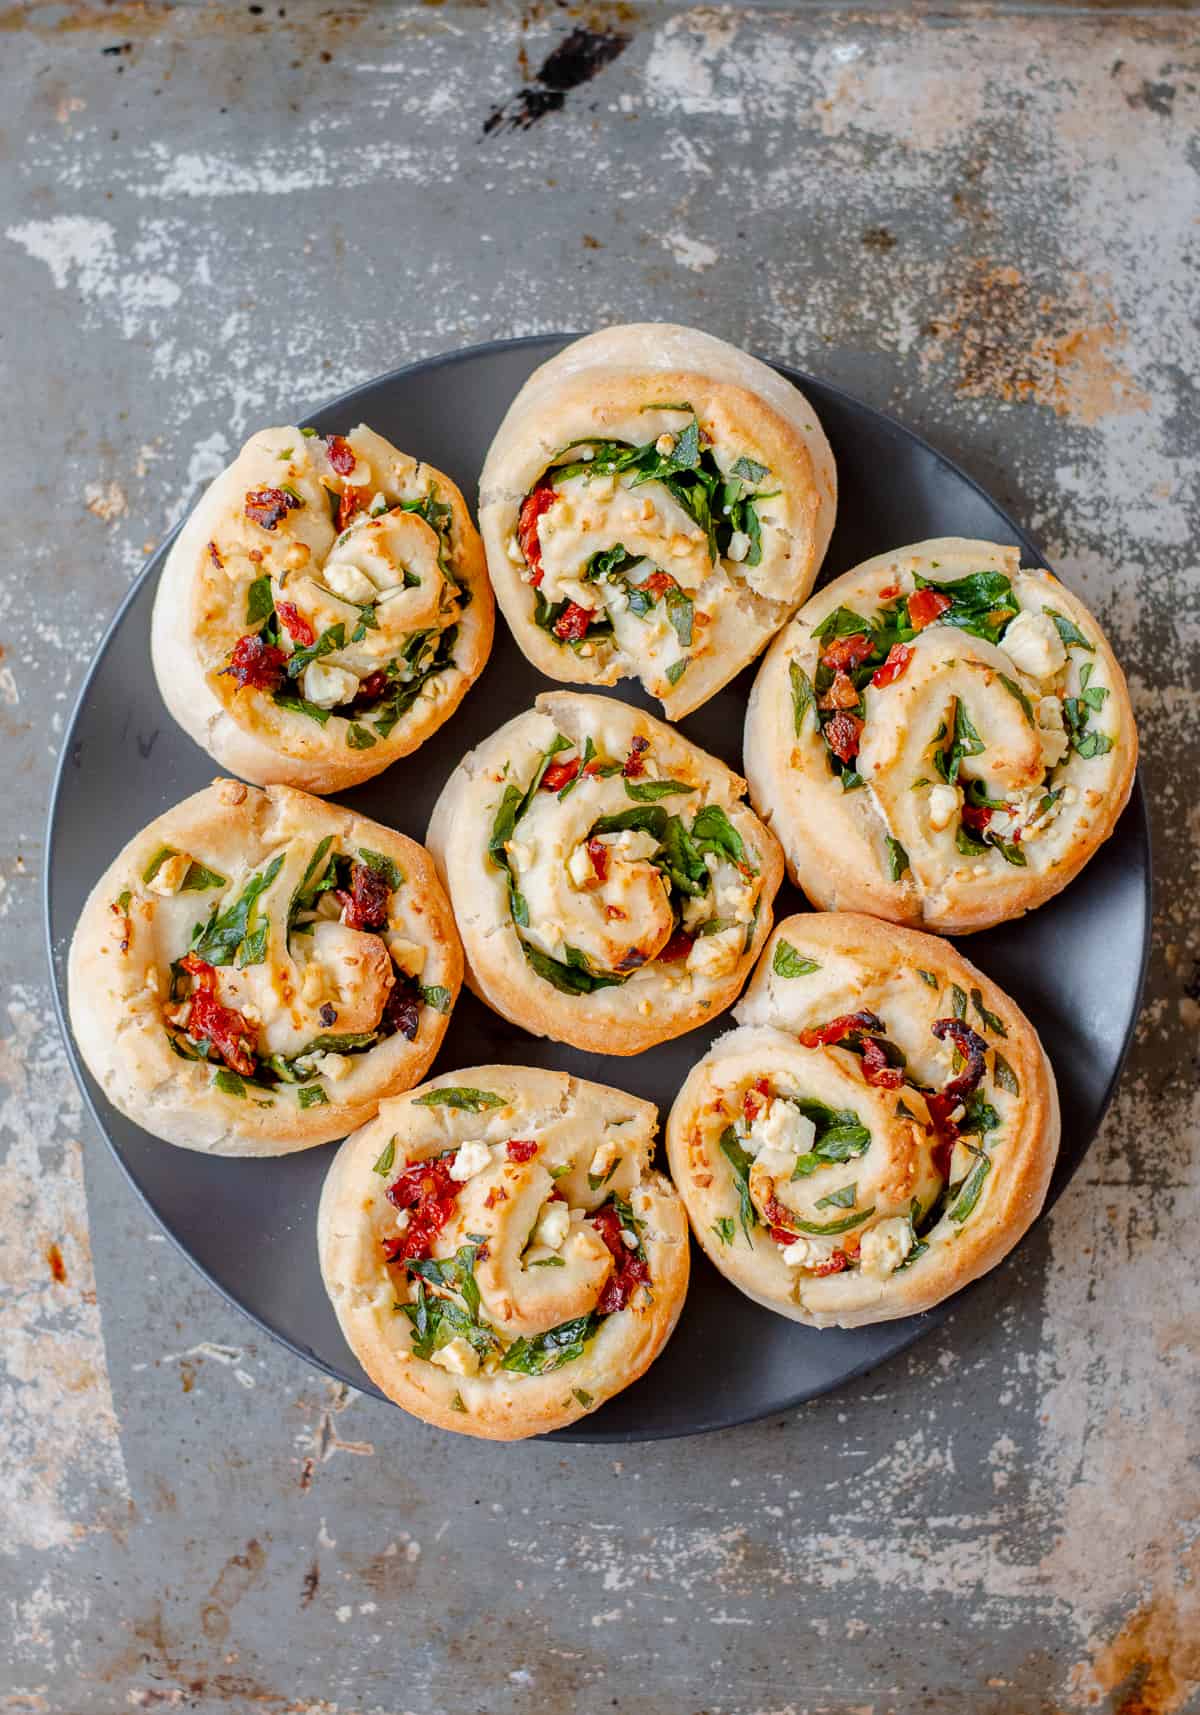 Seven spinach, feta and sundried tomato scrolls on a black plate on grey background.